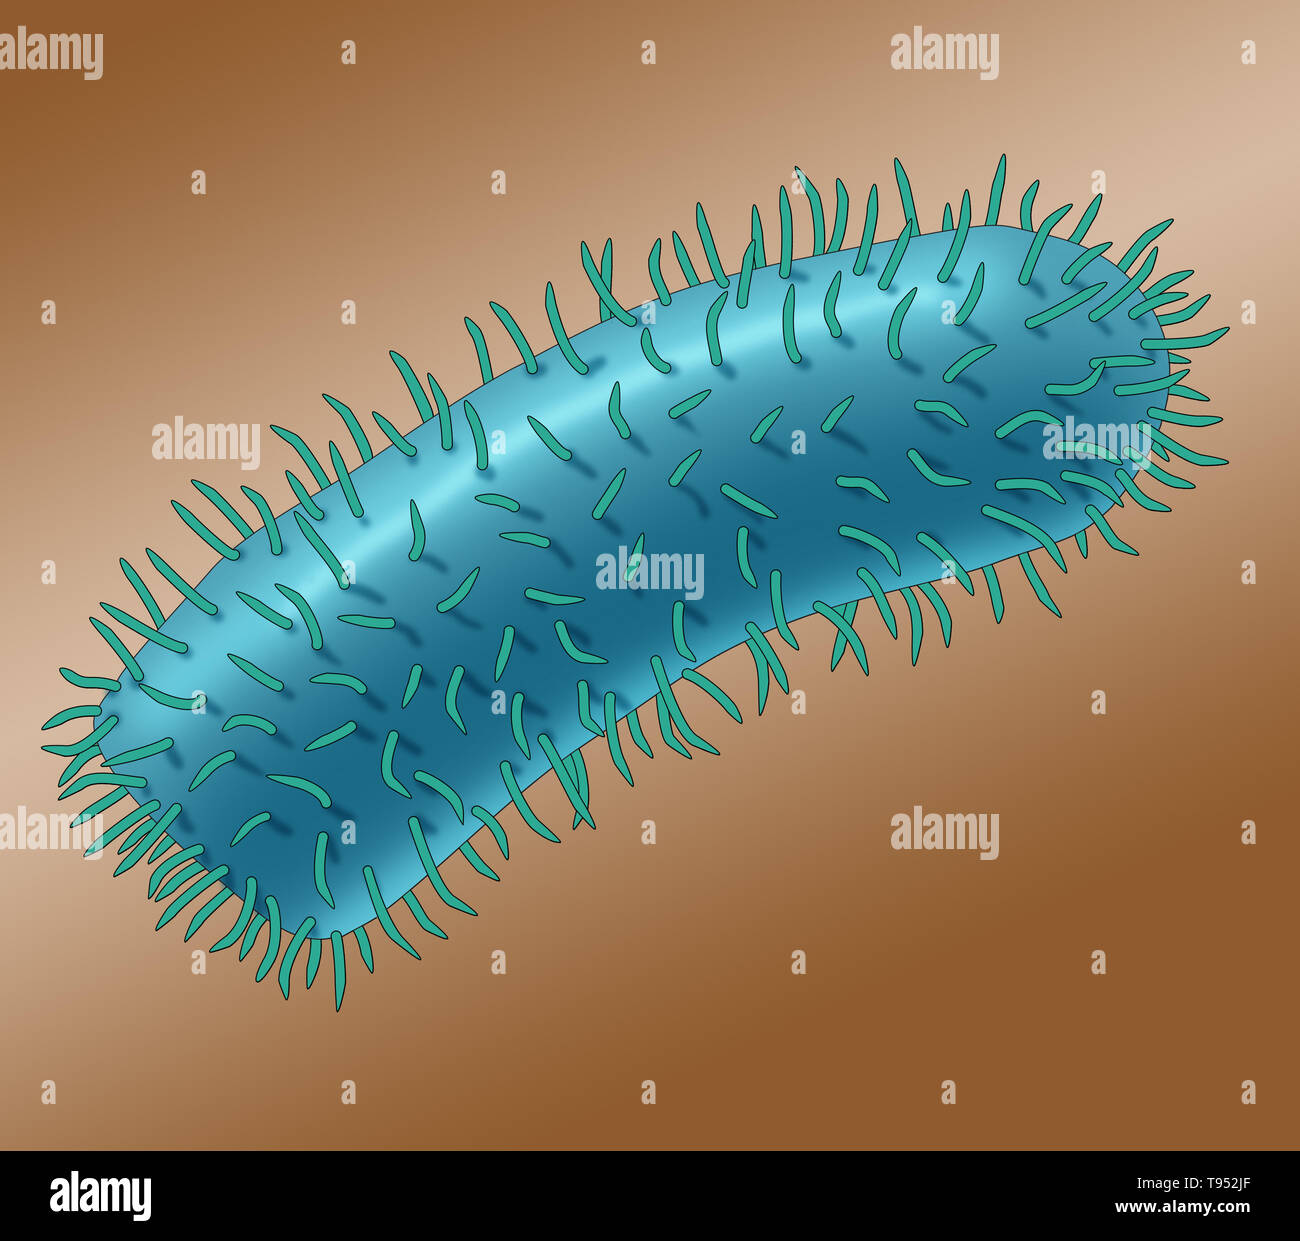 Illustration the rabies virus. Rabies virus is a neurotropic virus that causes rabies in humans and animals. The rabies virus has a cylindrical morphology and is the type species of the Lyssavirus genus of the Rhabdoviridae family. Stock Photo